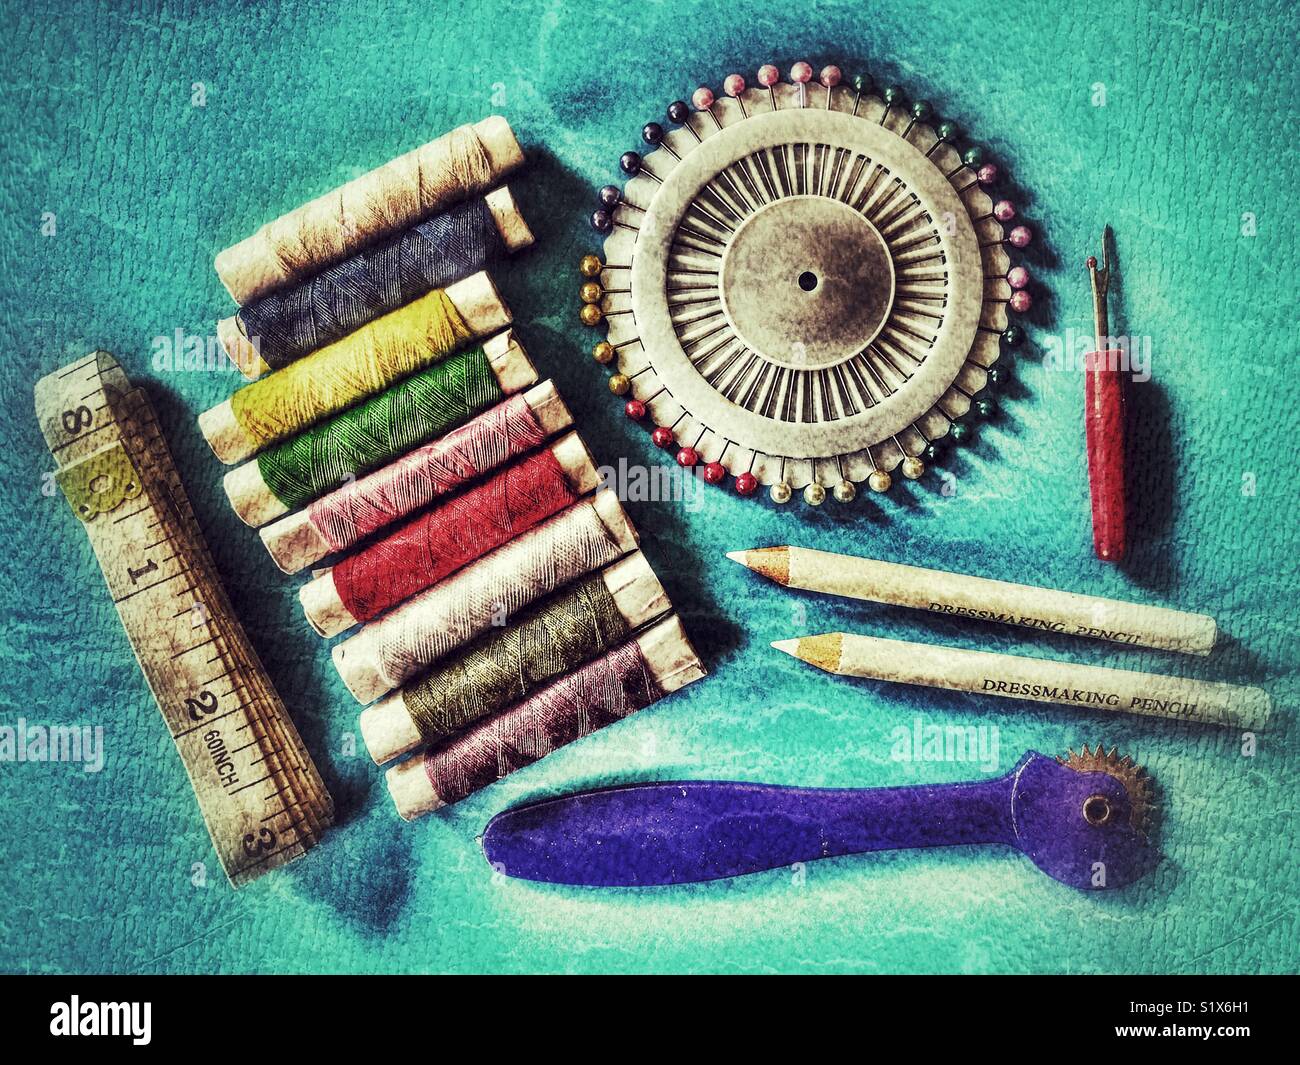 Sewing kit. Tape measure, colourful threads, pins, dressmaker pencils Stock Photo